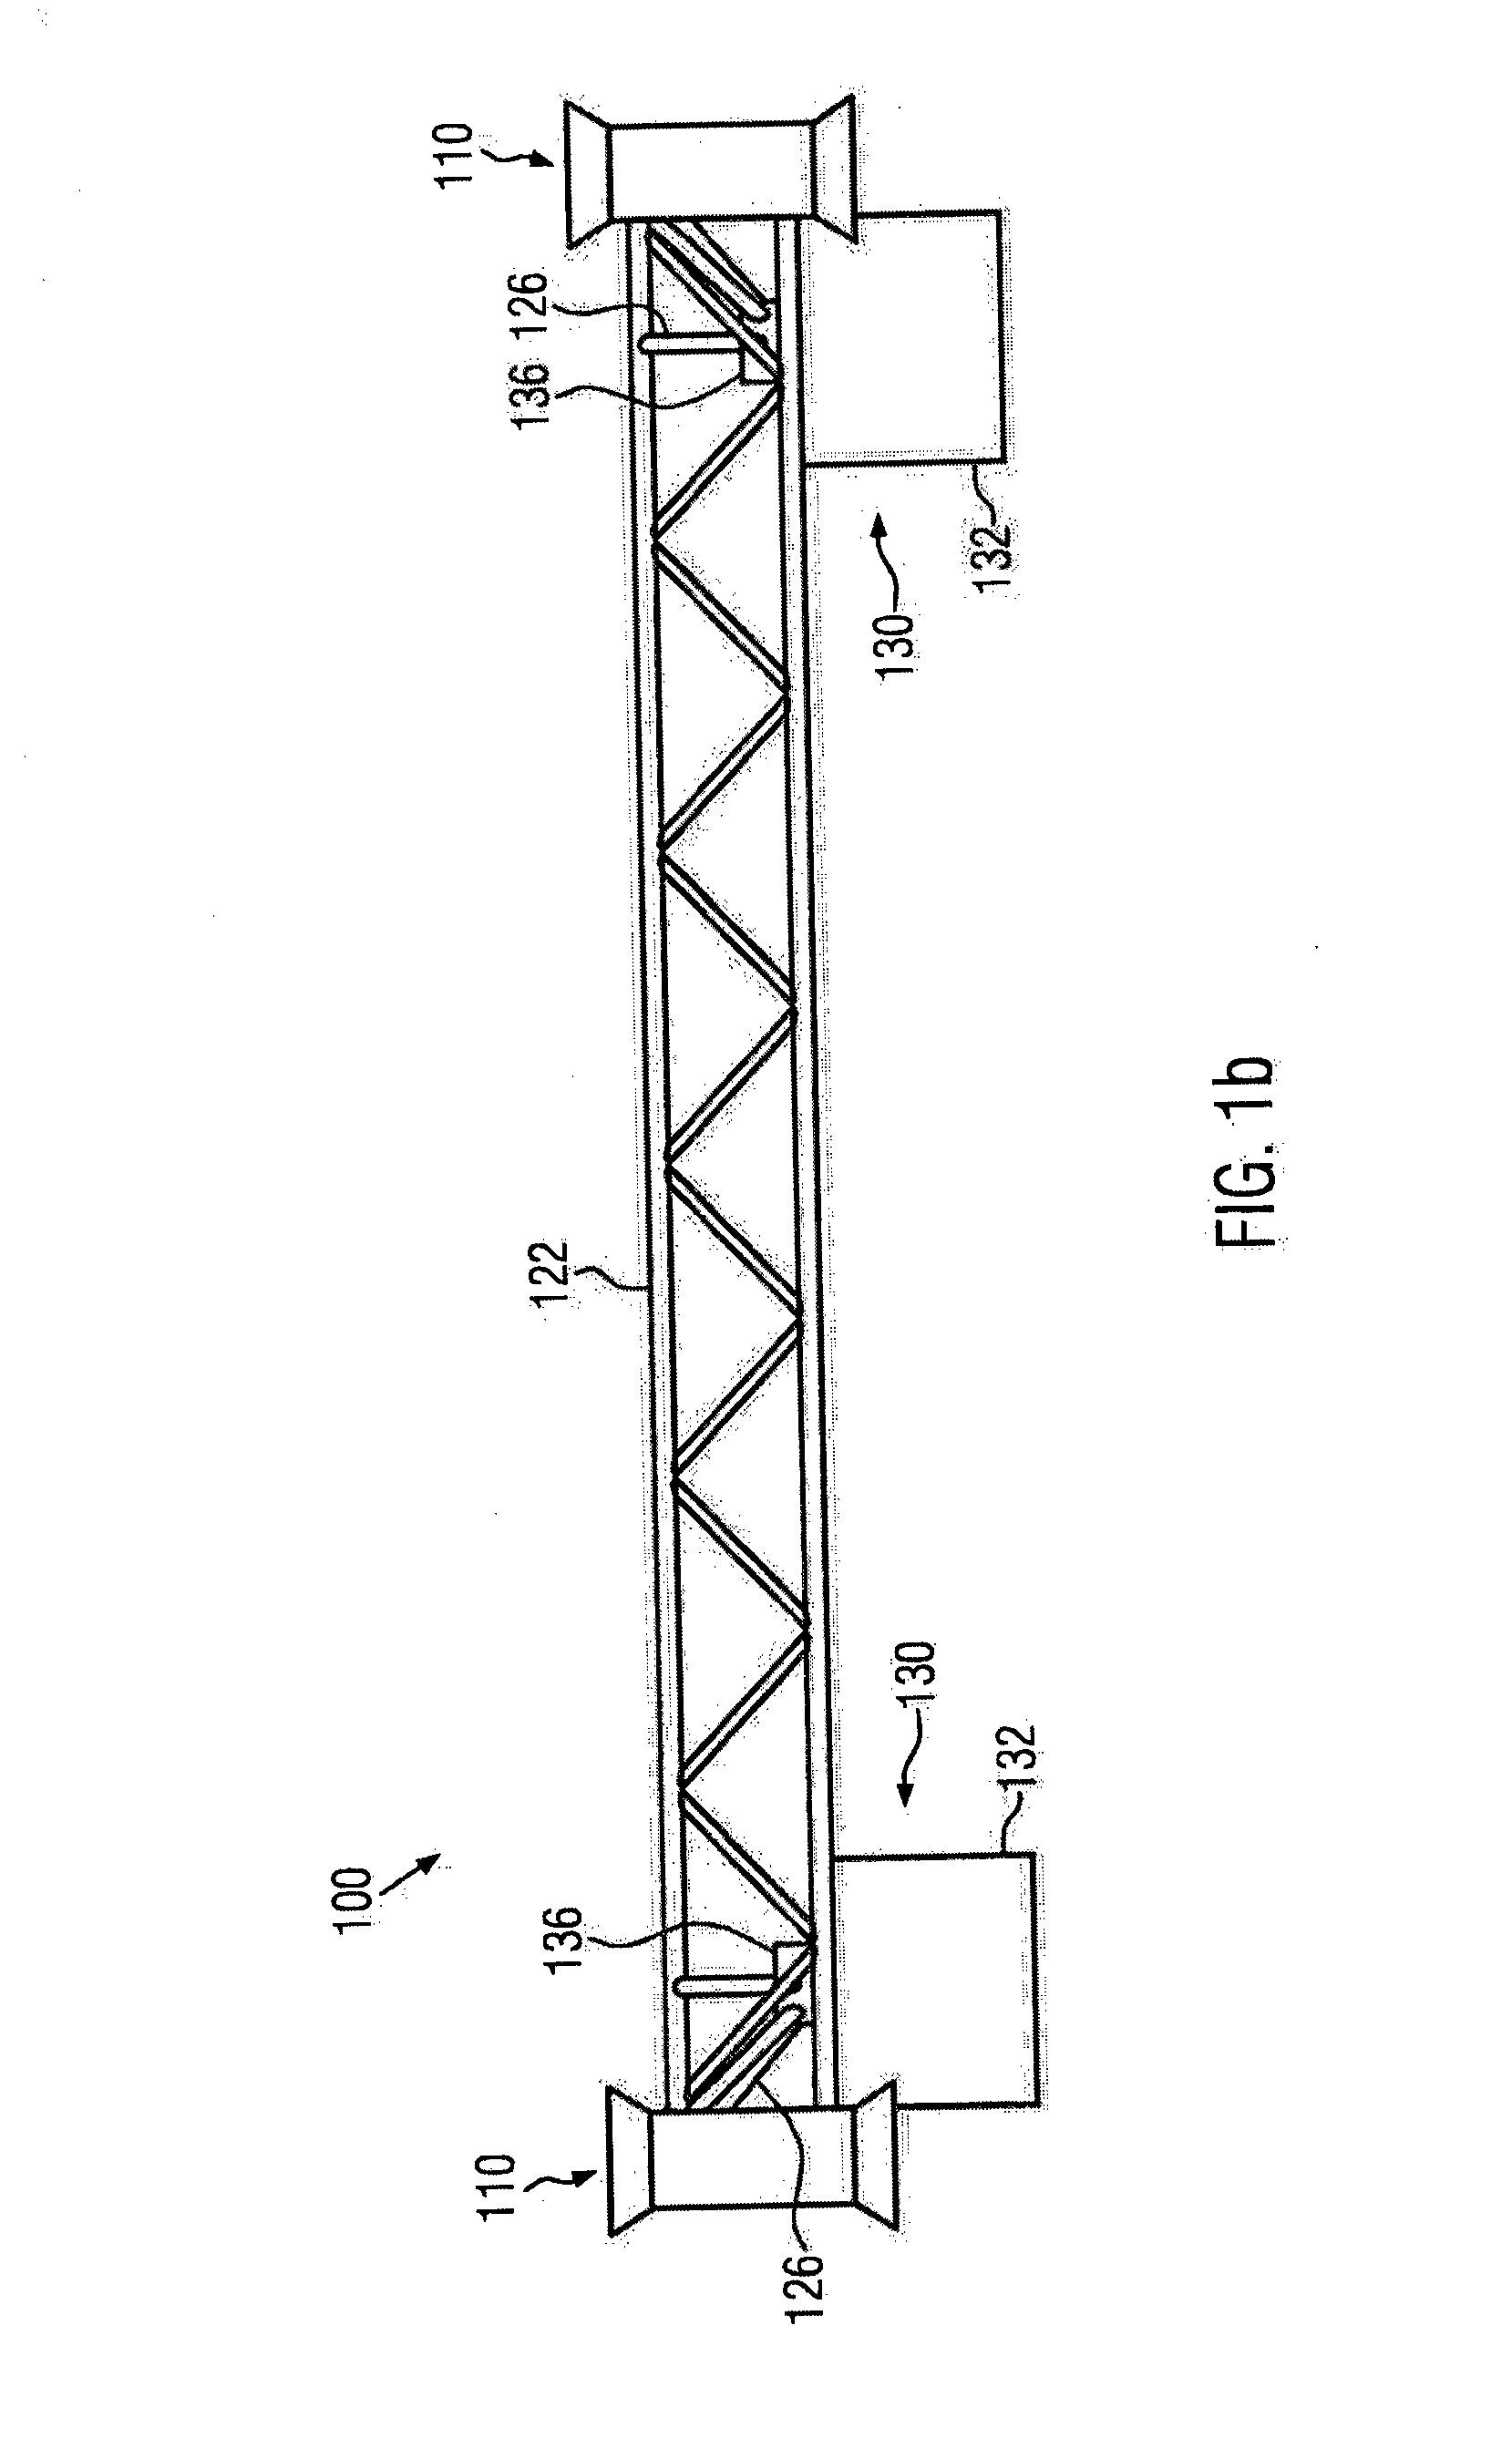 Method of installing an offshore foundation and template for use in installing an offshore foundation